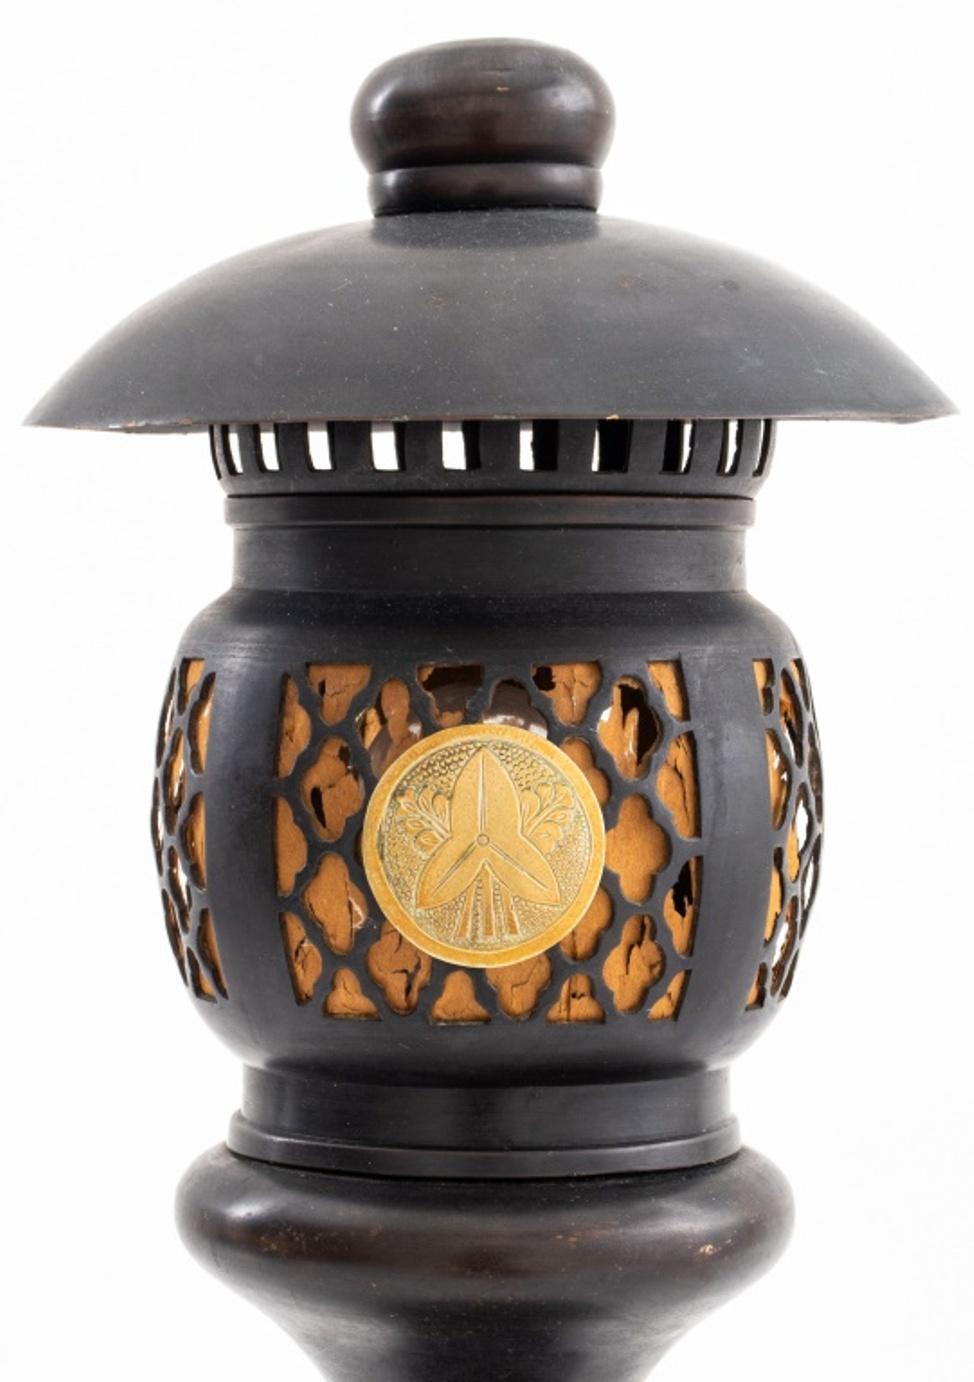 Japanese Art Deco gilded brass mounted bronze lamp in the form of a Toro Lantern with domed cover and silk-lined reticulated globe mounted with a Kamon crest above a turned base mounted on a gilt brass plinth.

Dealer: S138XX